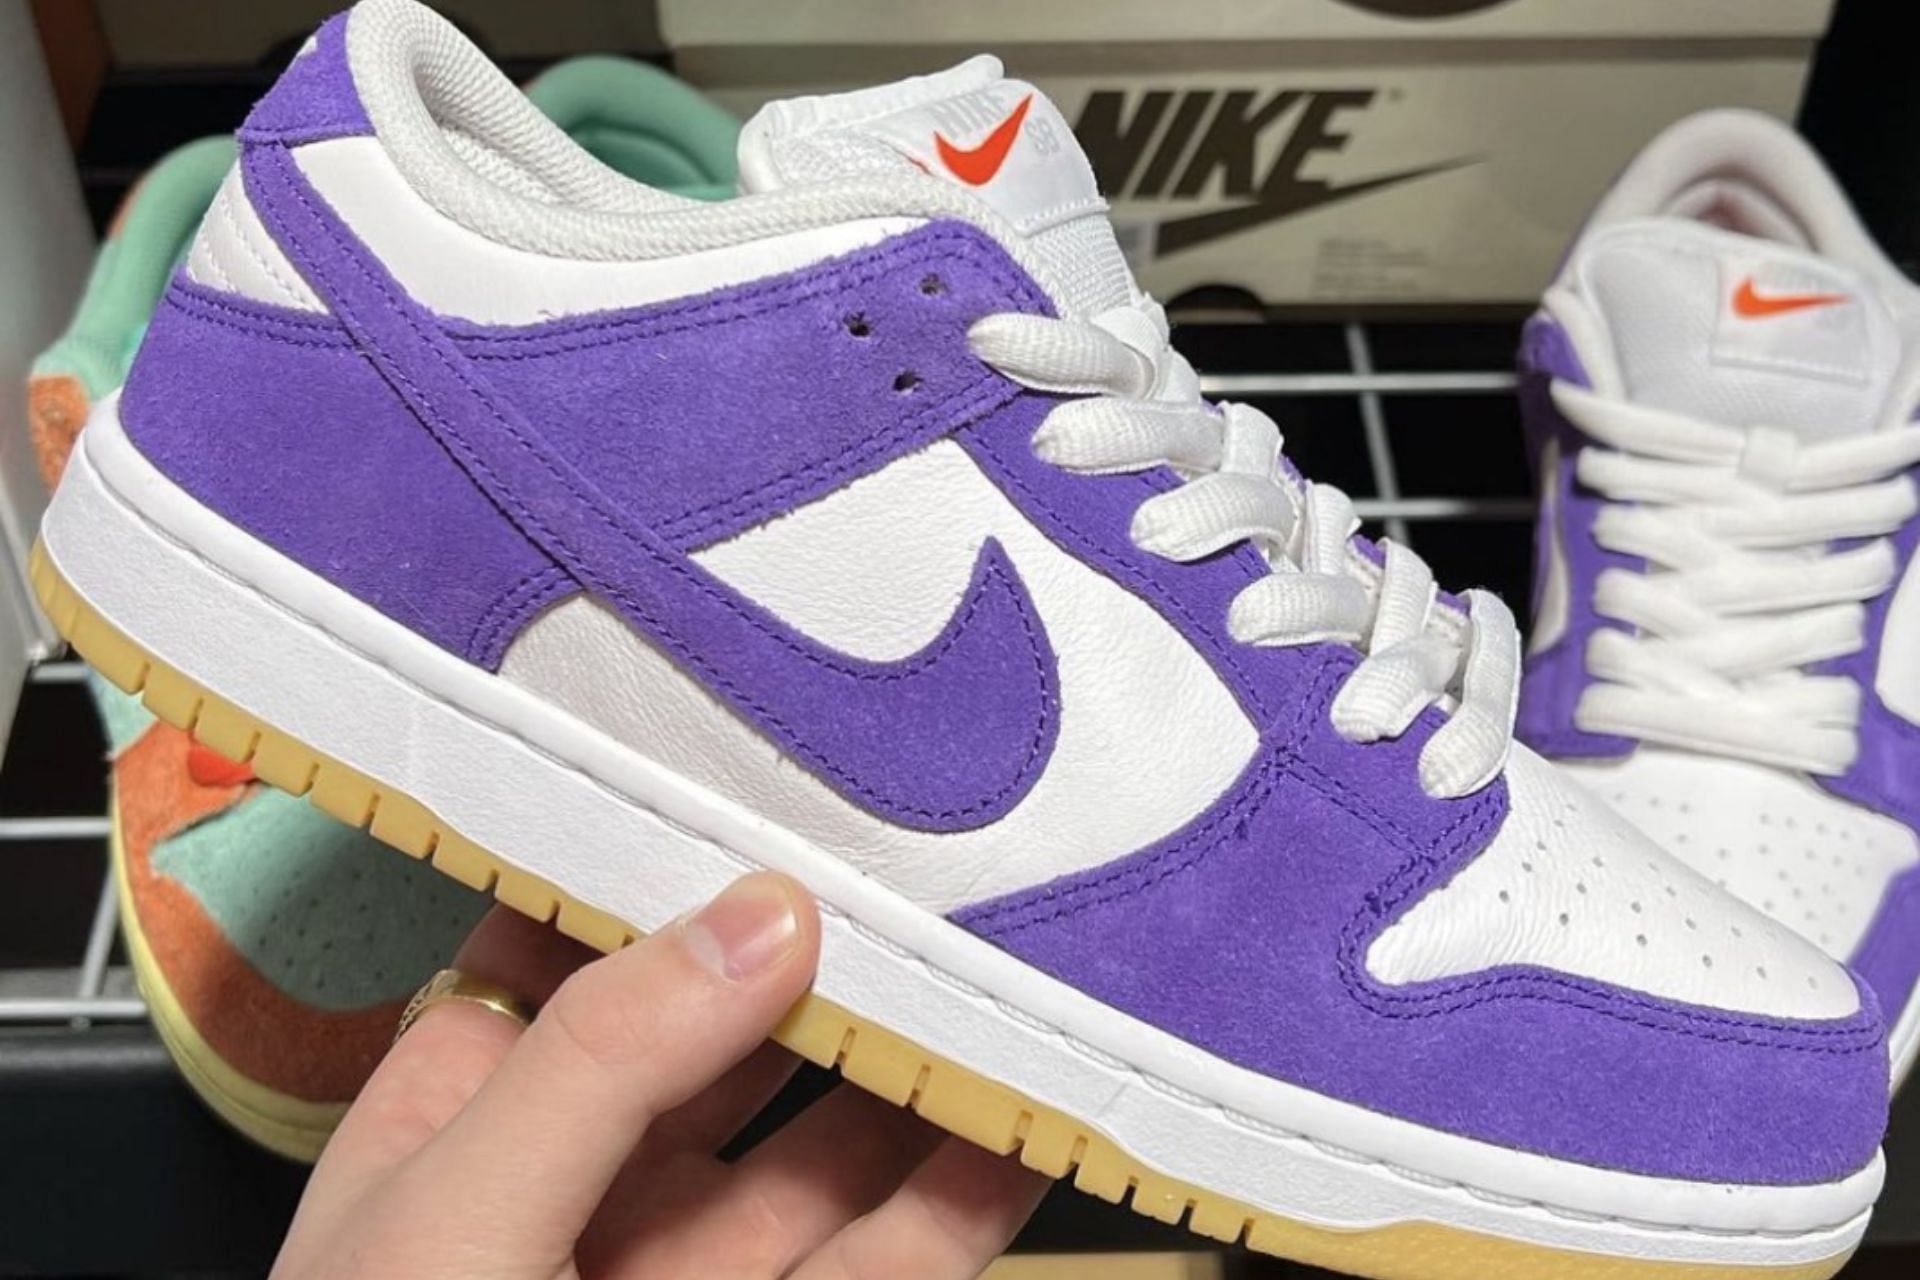 The in-hand look at the Court Purple Gum colorway of SB Dunk Low shoes (Image via Instagram/@masterchefian)